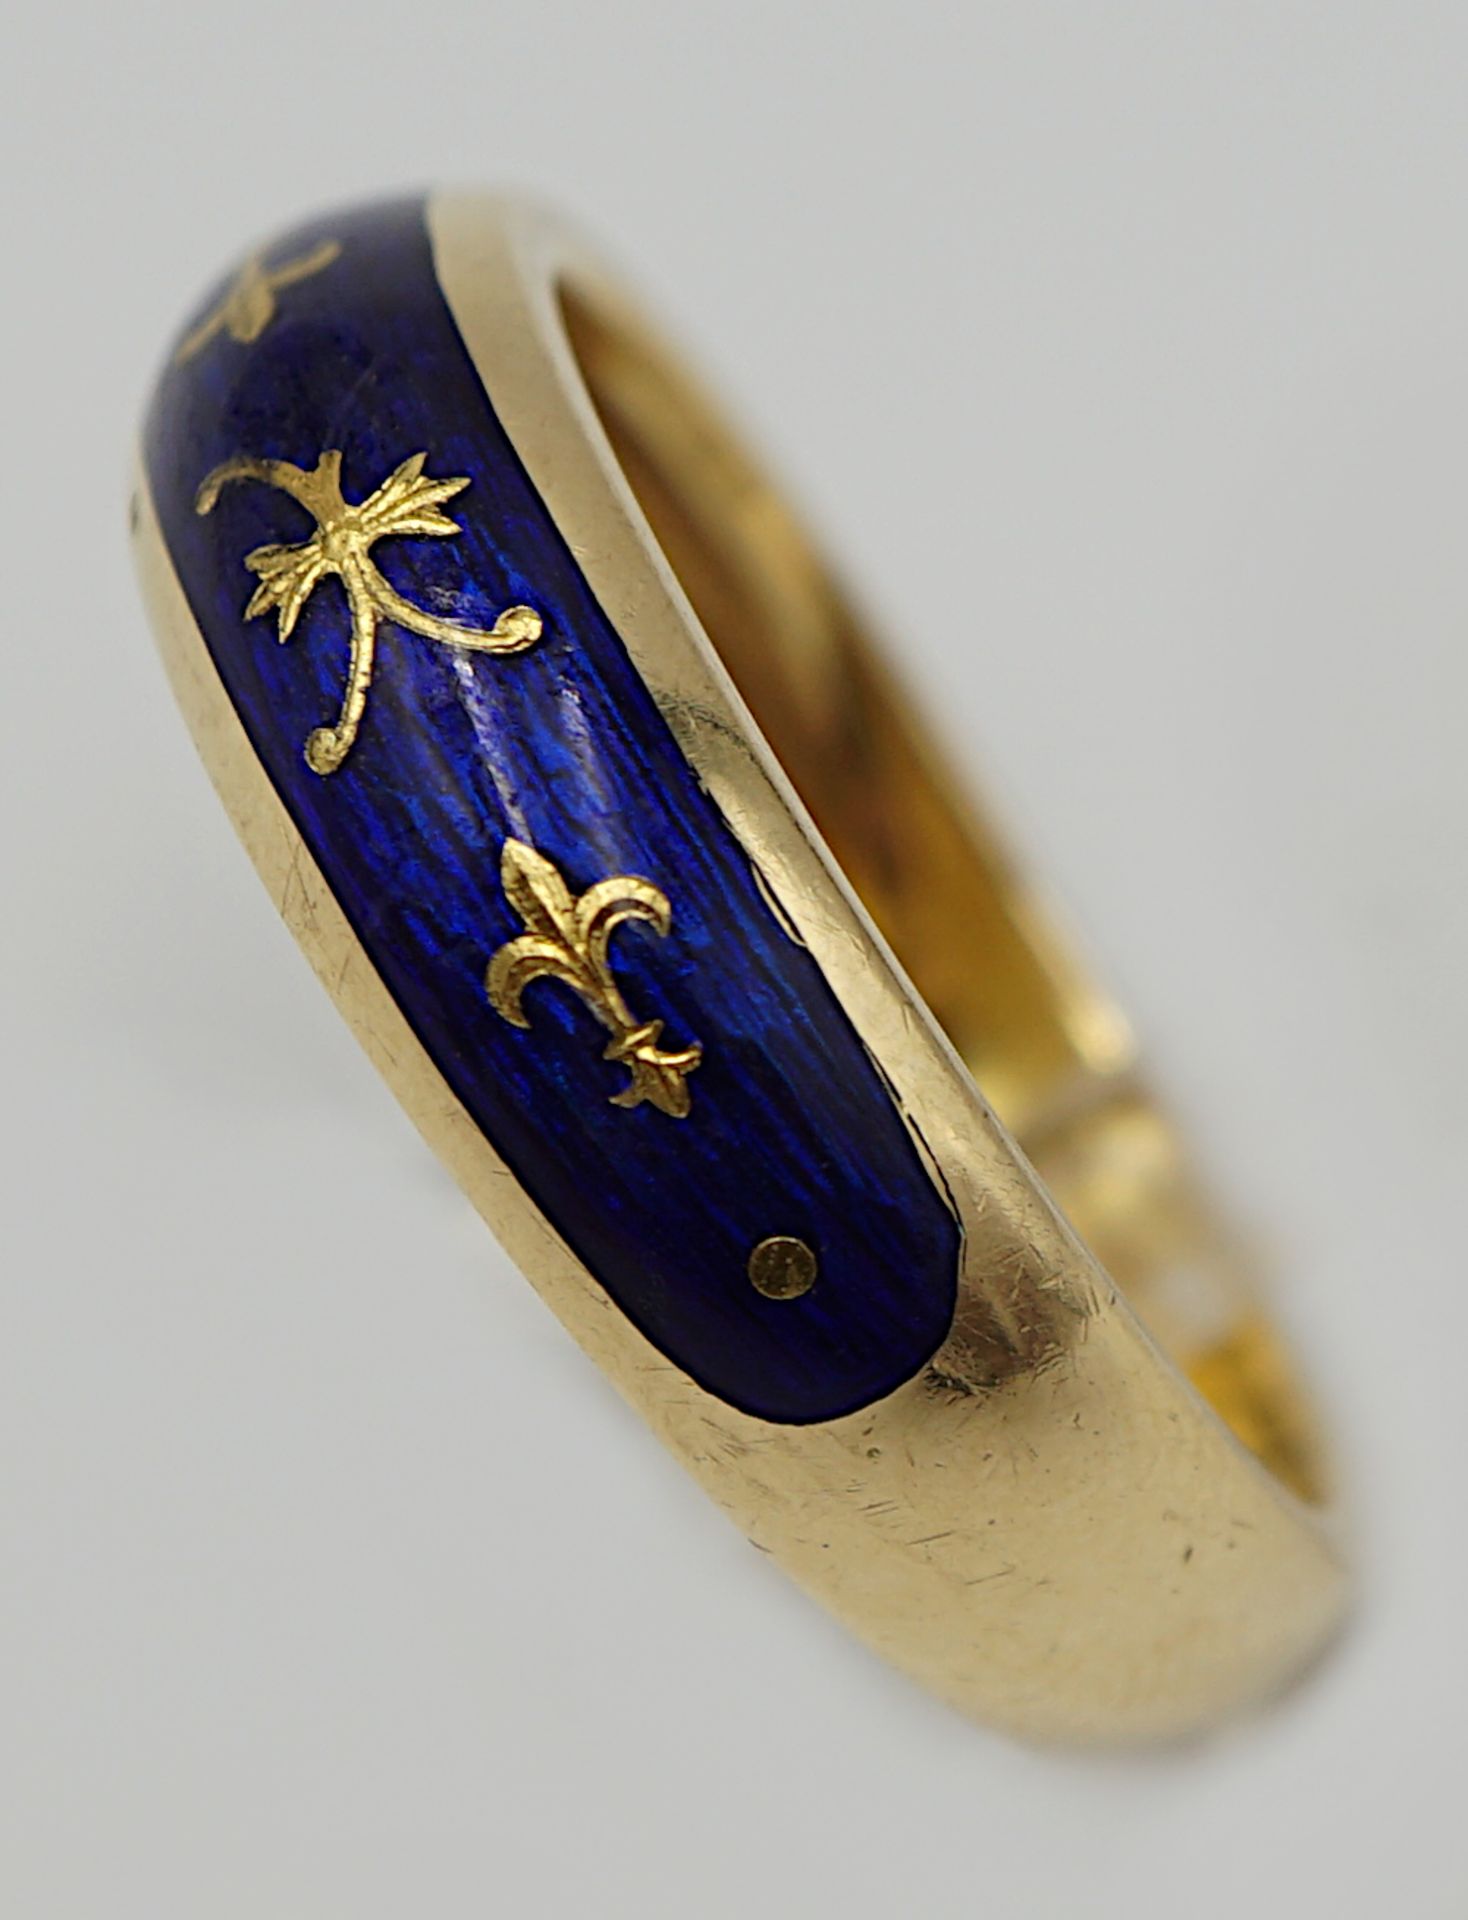 1 Damenring GG 18ct. FABERGÉ mit blauem Emaille - Image 2 of 2